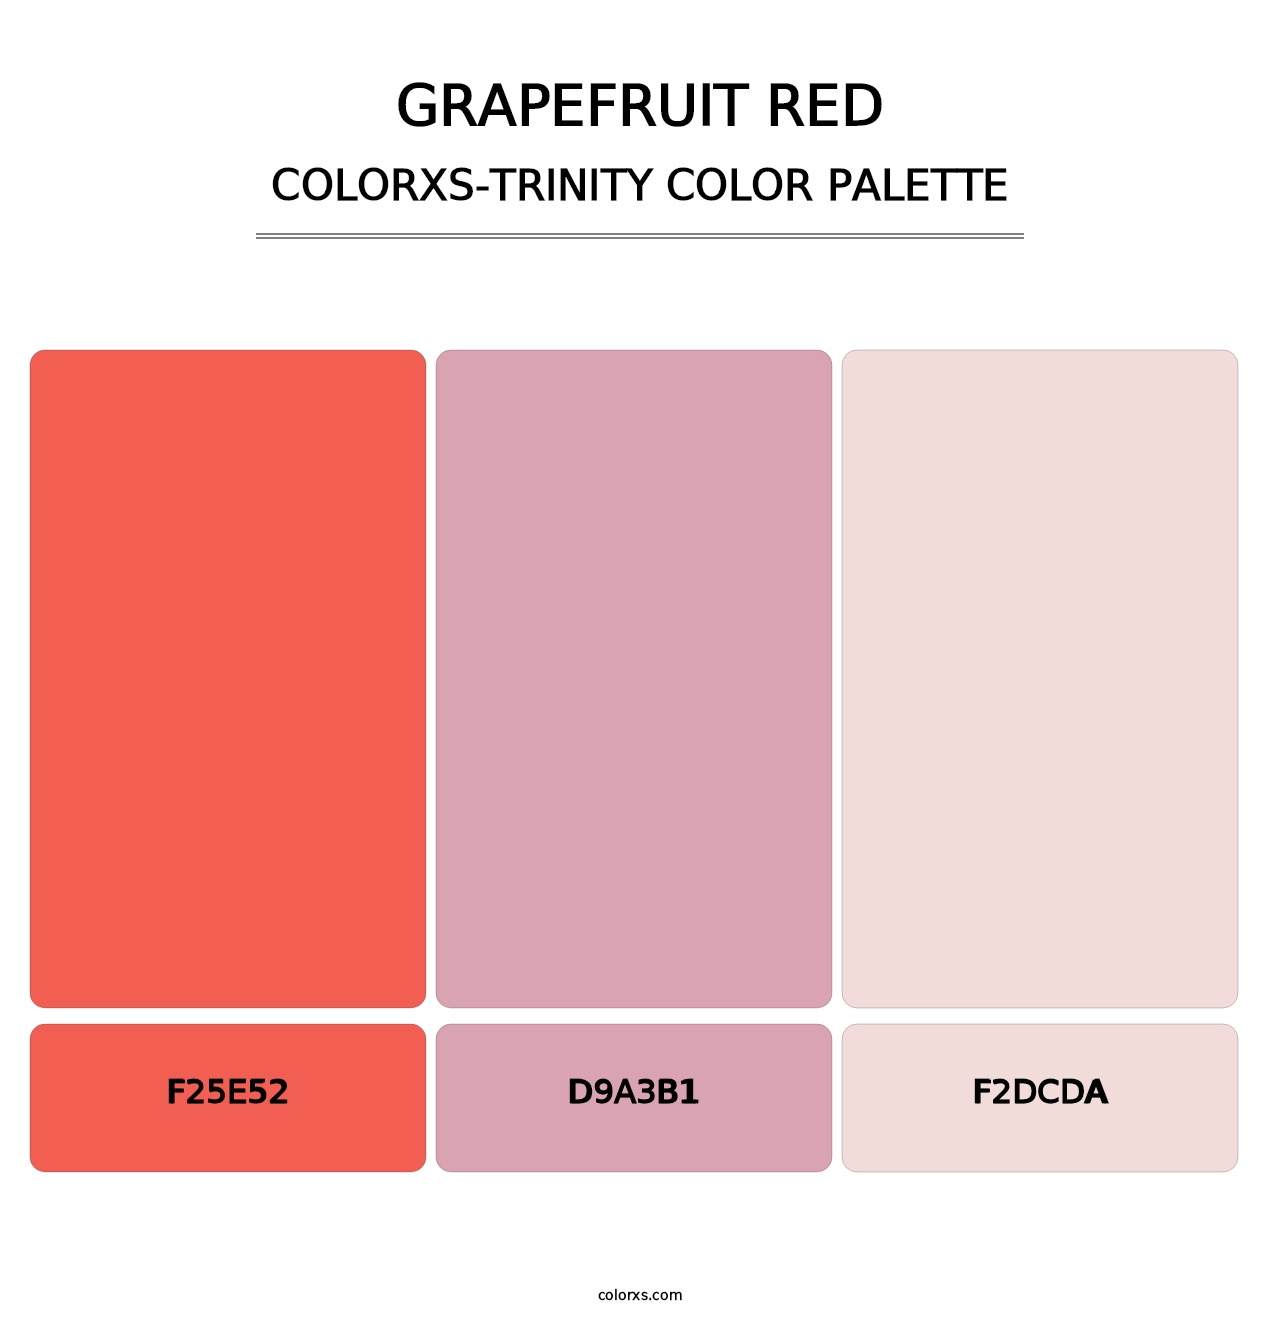 Grapefruit Red - Colorxs Trinity Palette